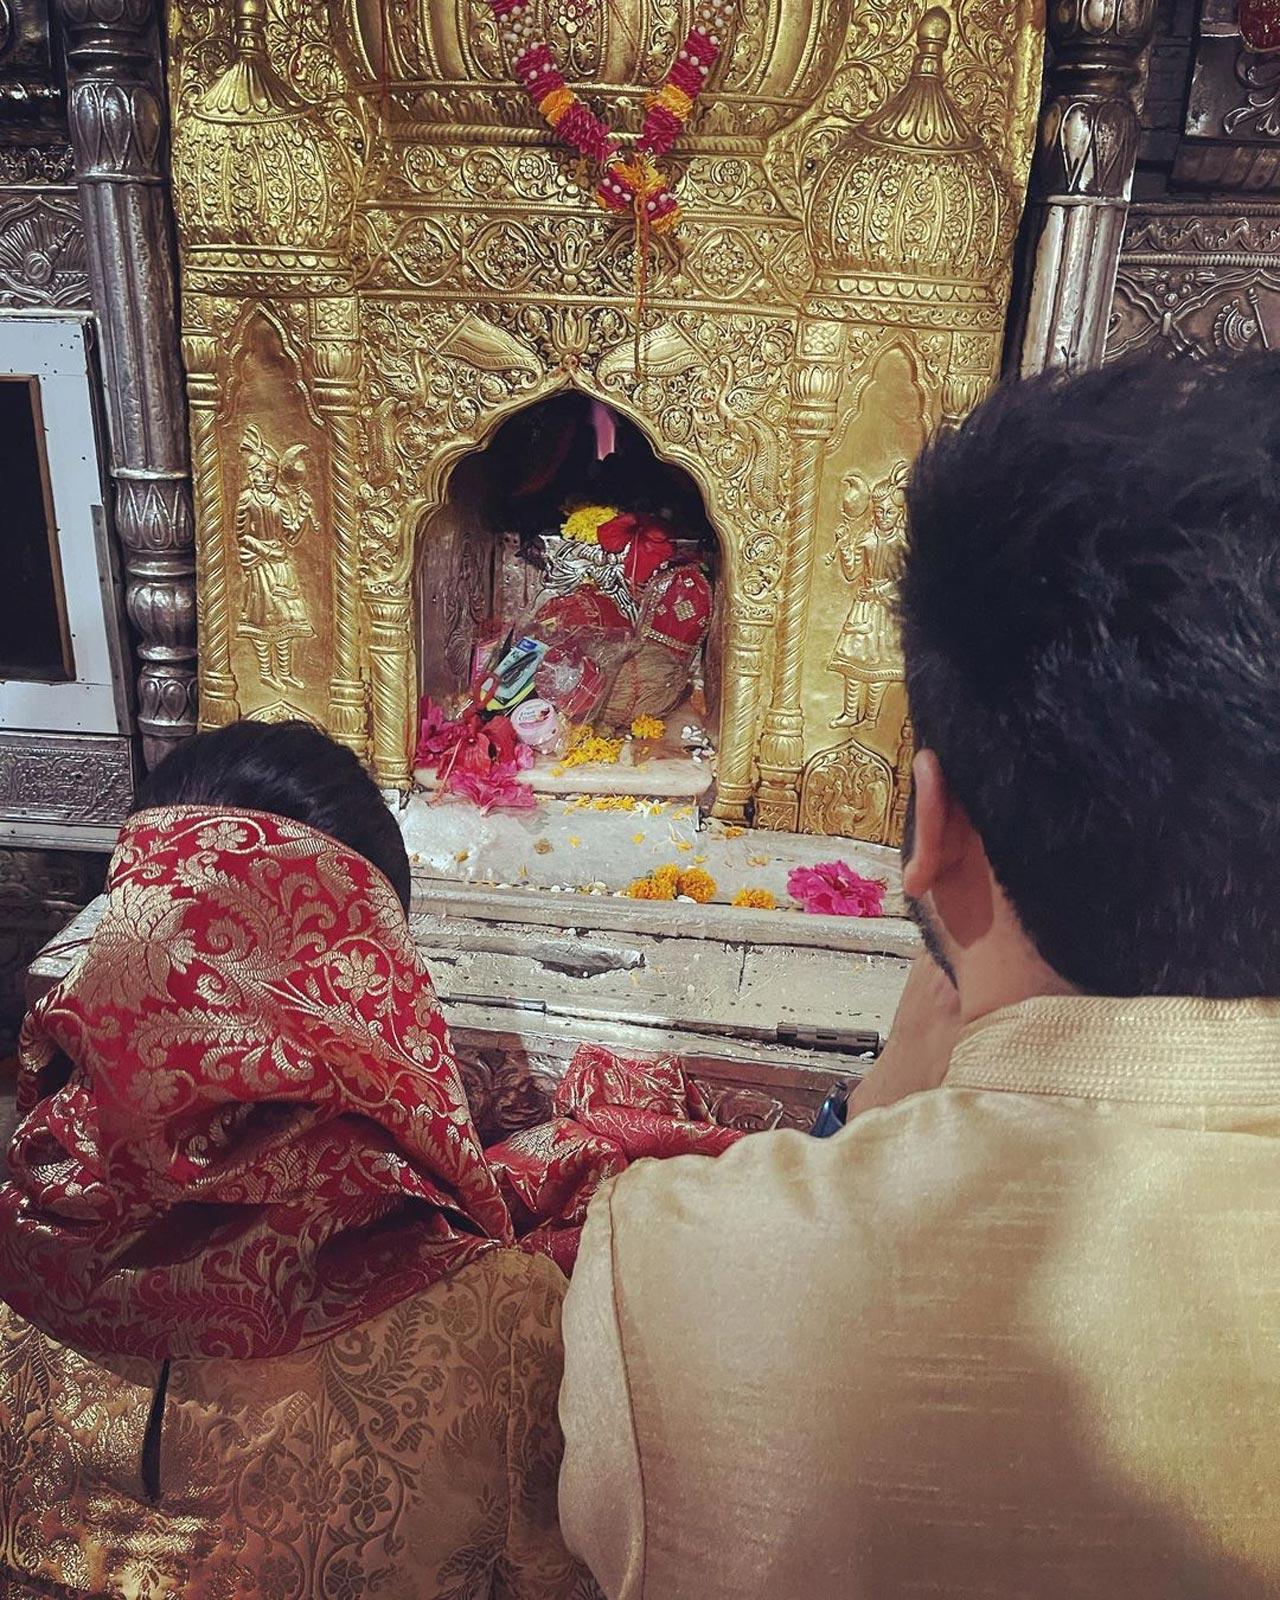 On Tuesday, Yami and Aditya visited the Naina Devi temple in her 